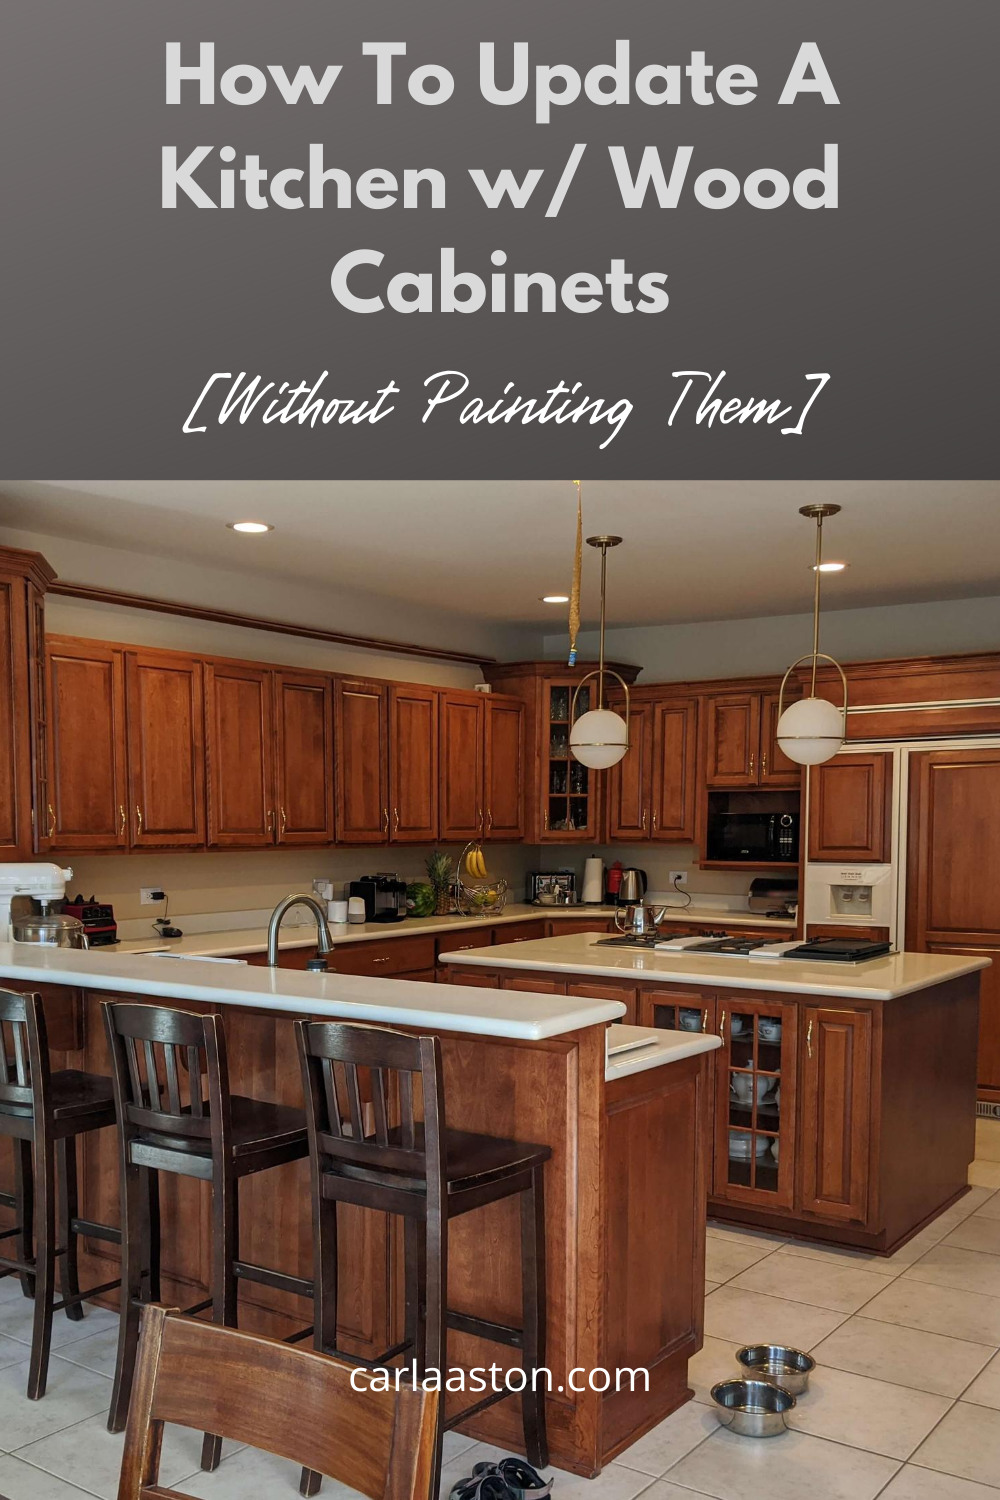 How To Update A Kitchen With Wood Cabinets [Without Painting Them ...